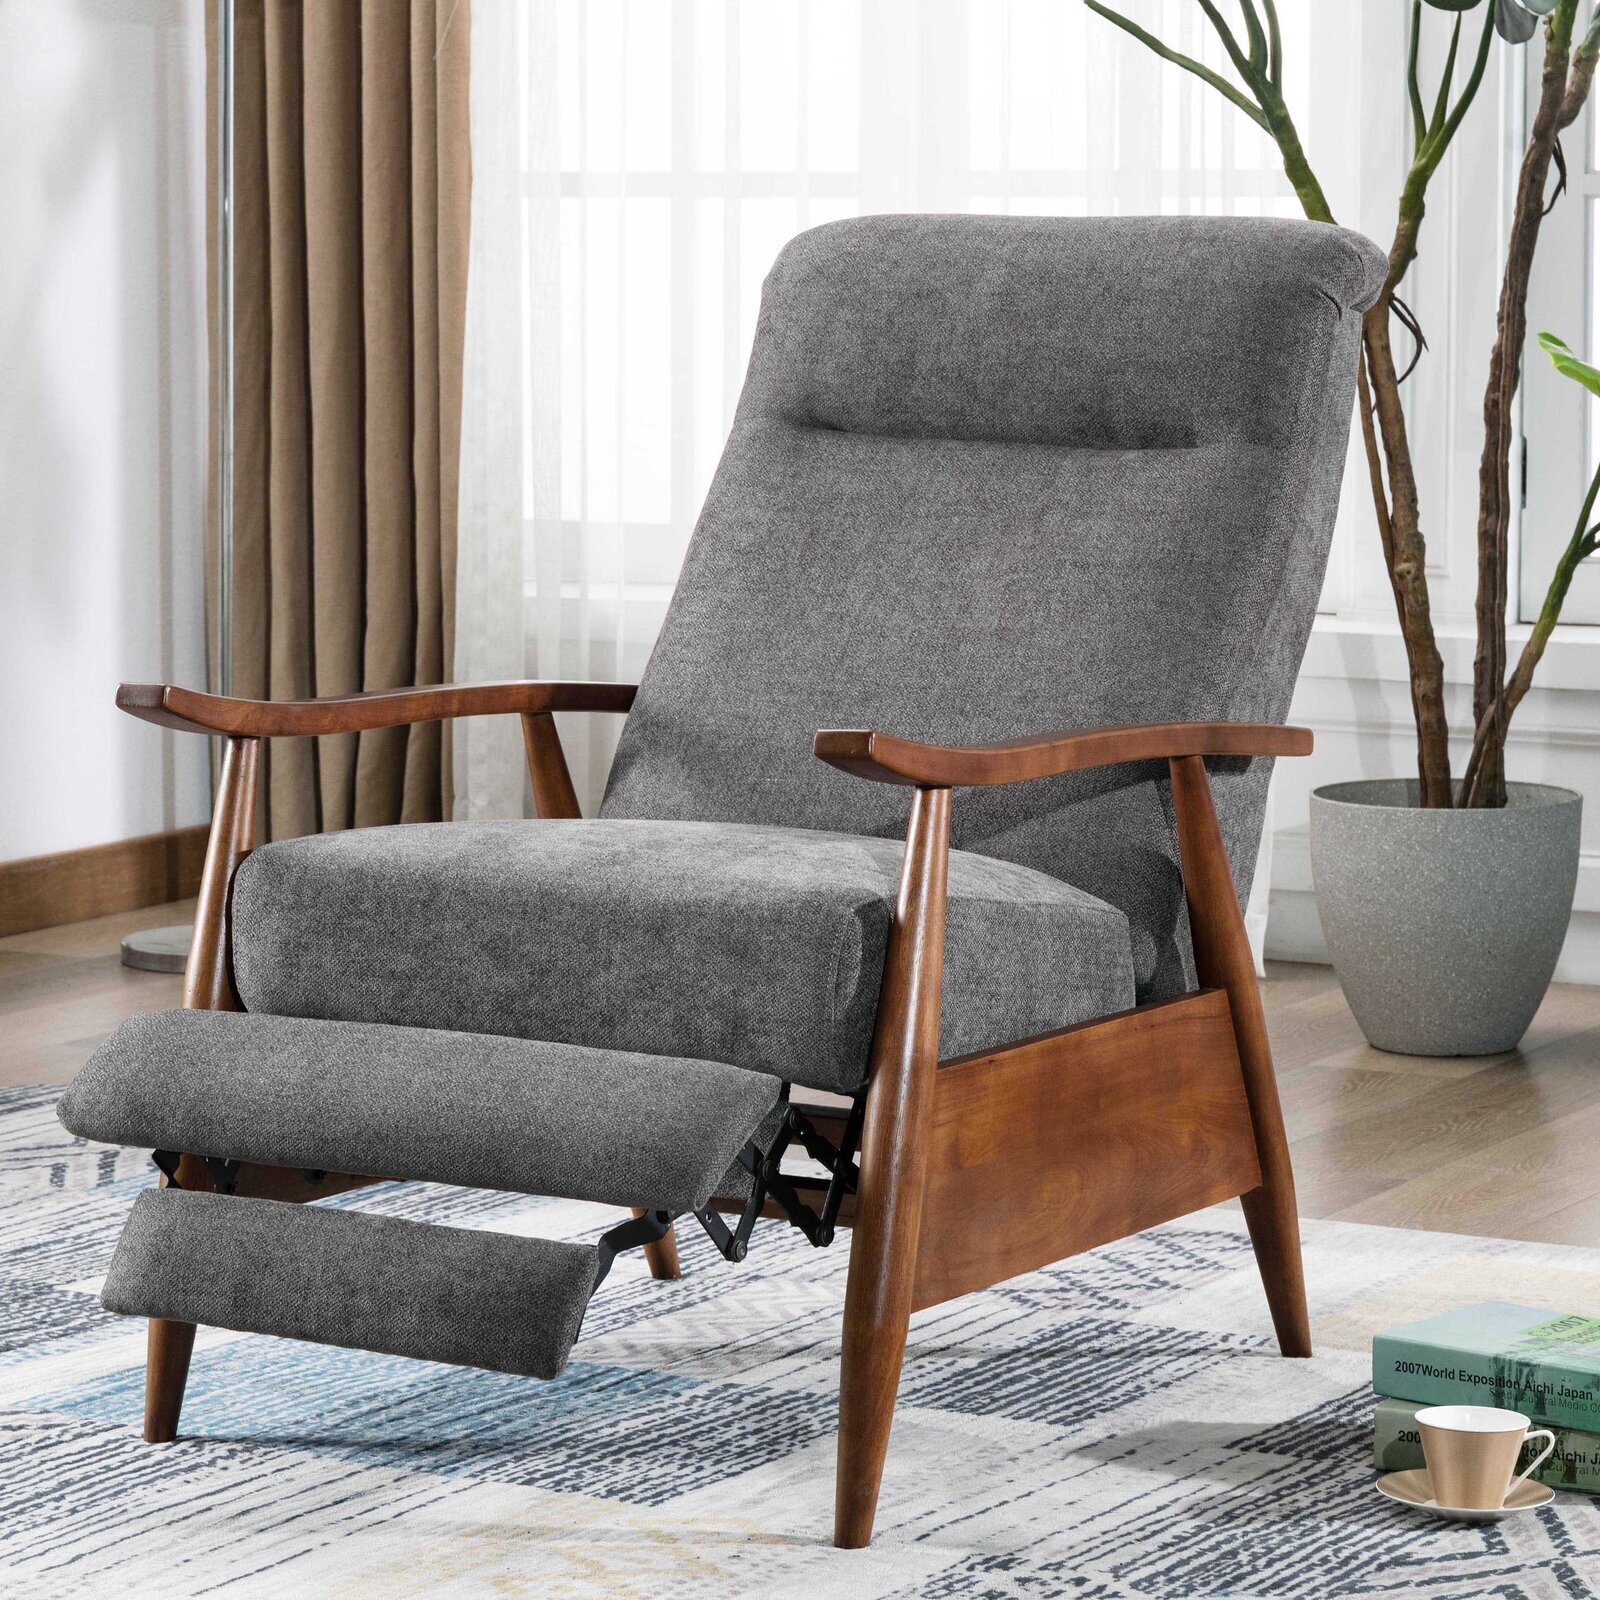 High Recliner Chair With Wooden Frame